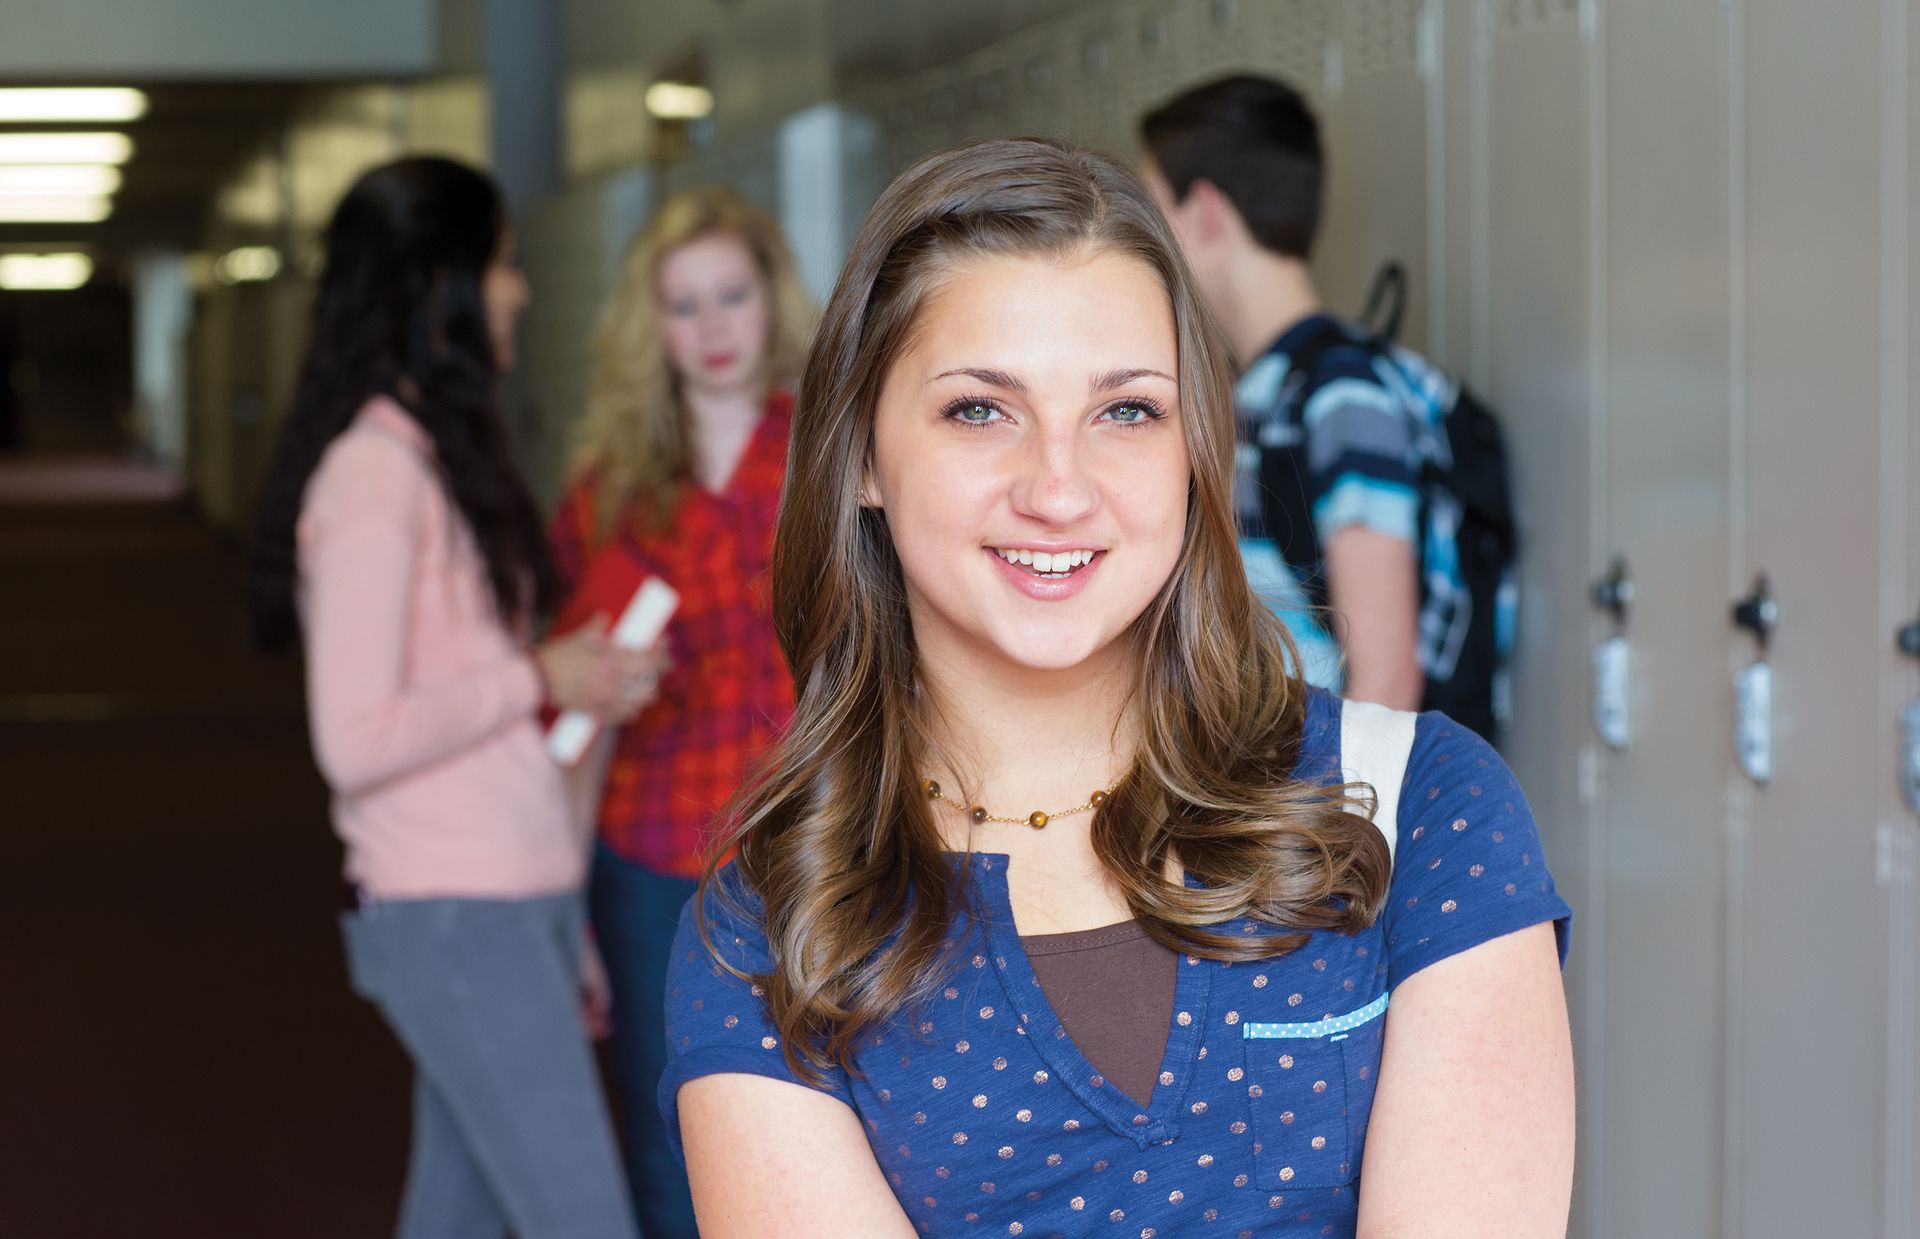 A portrait of a young woman standing near her locker in a high school, with other teenagers in the background.